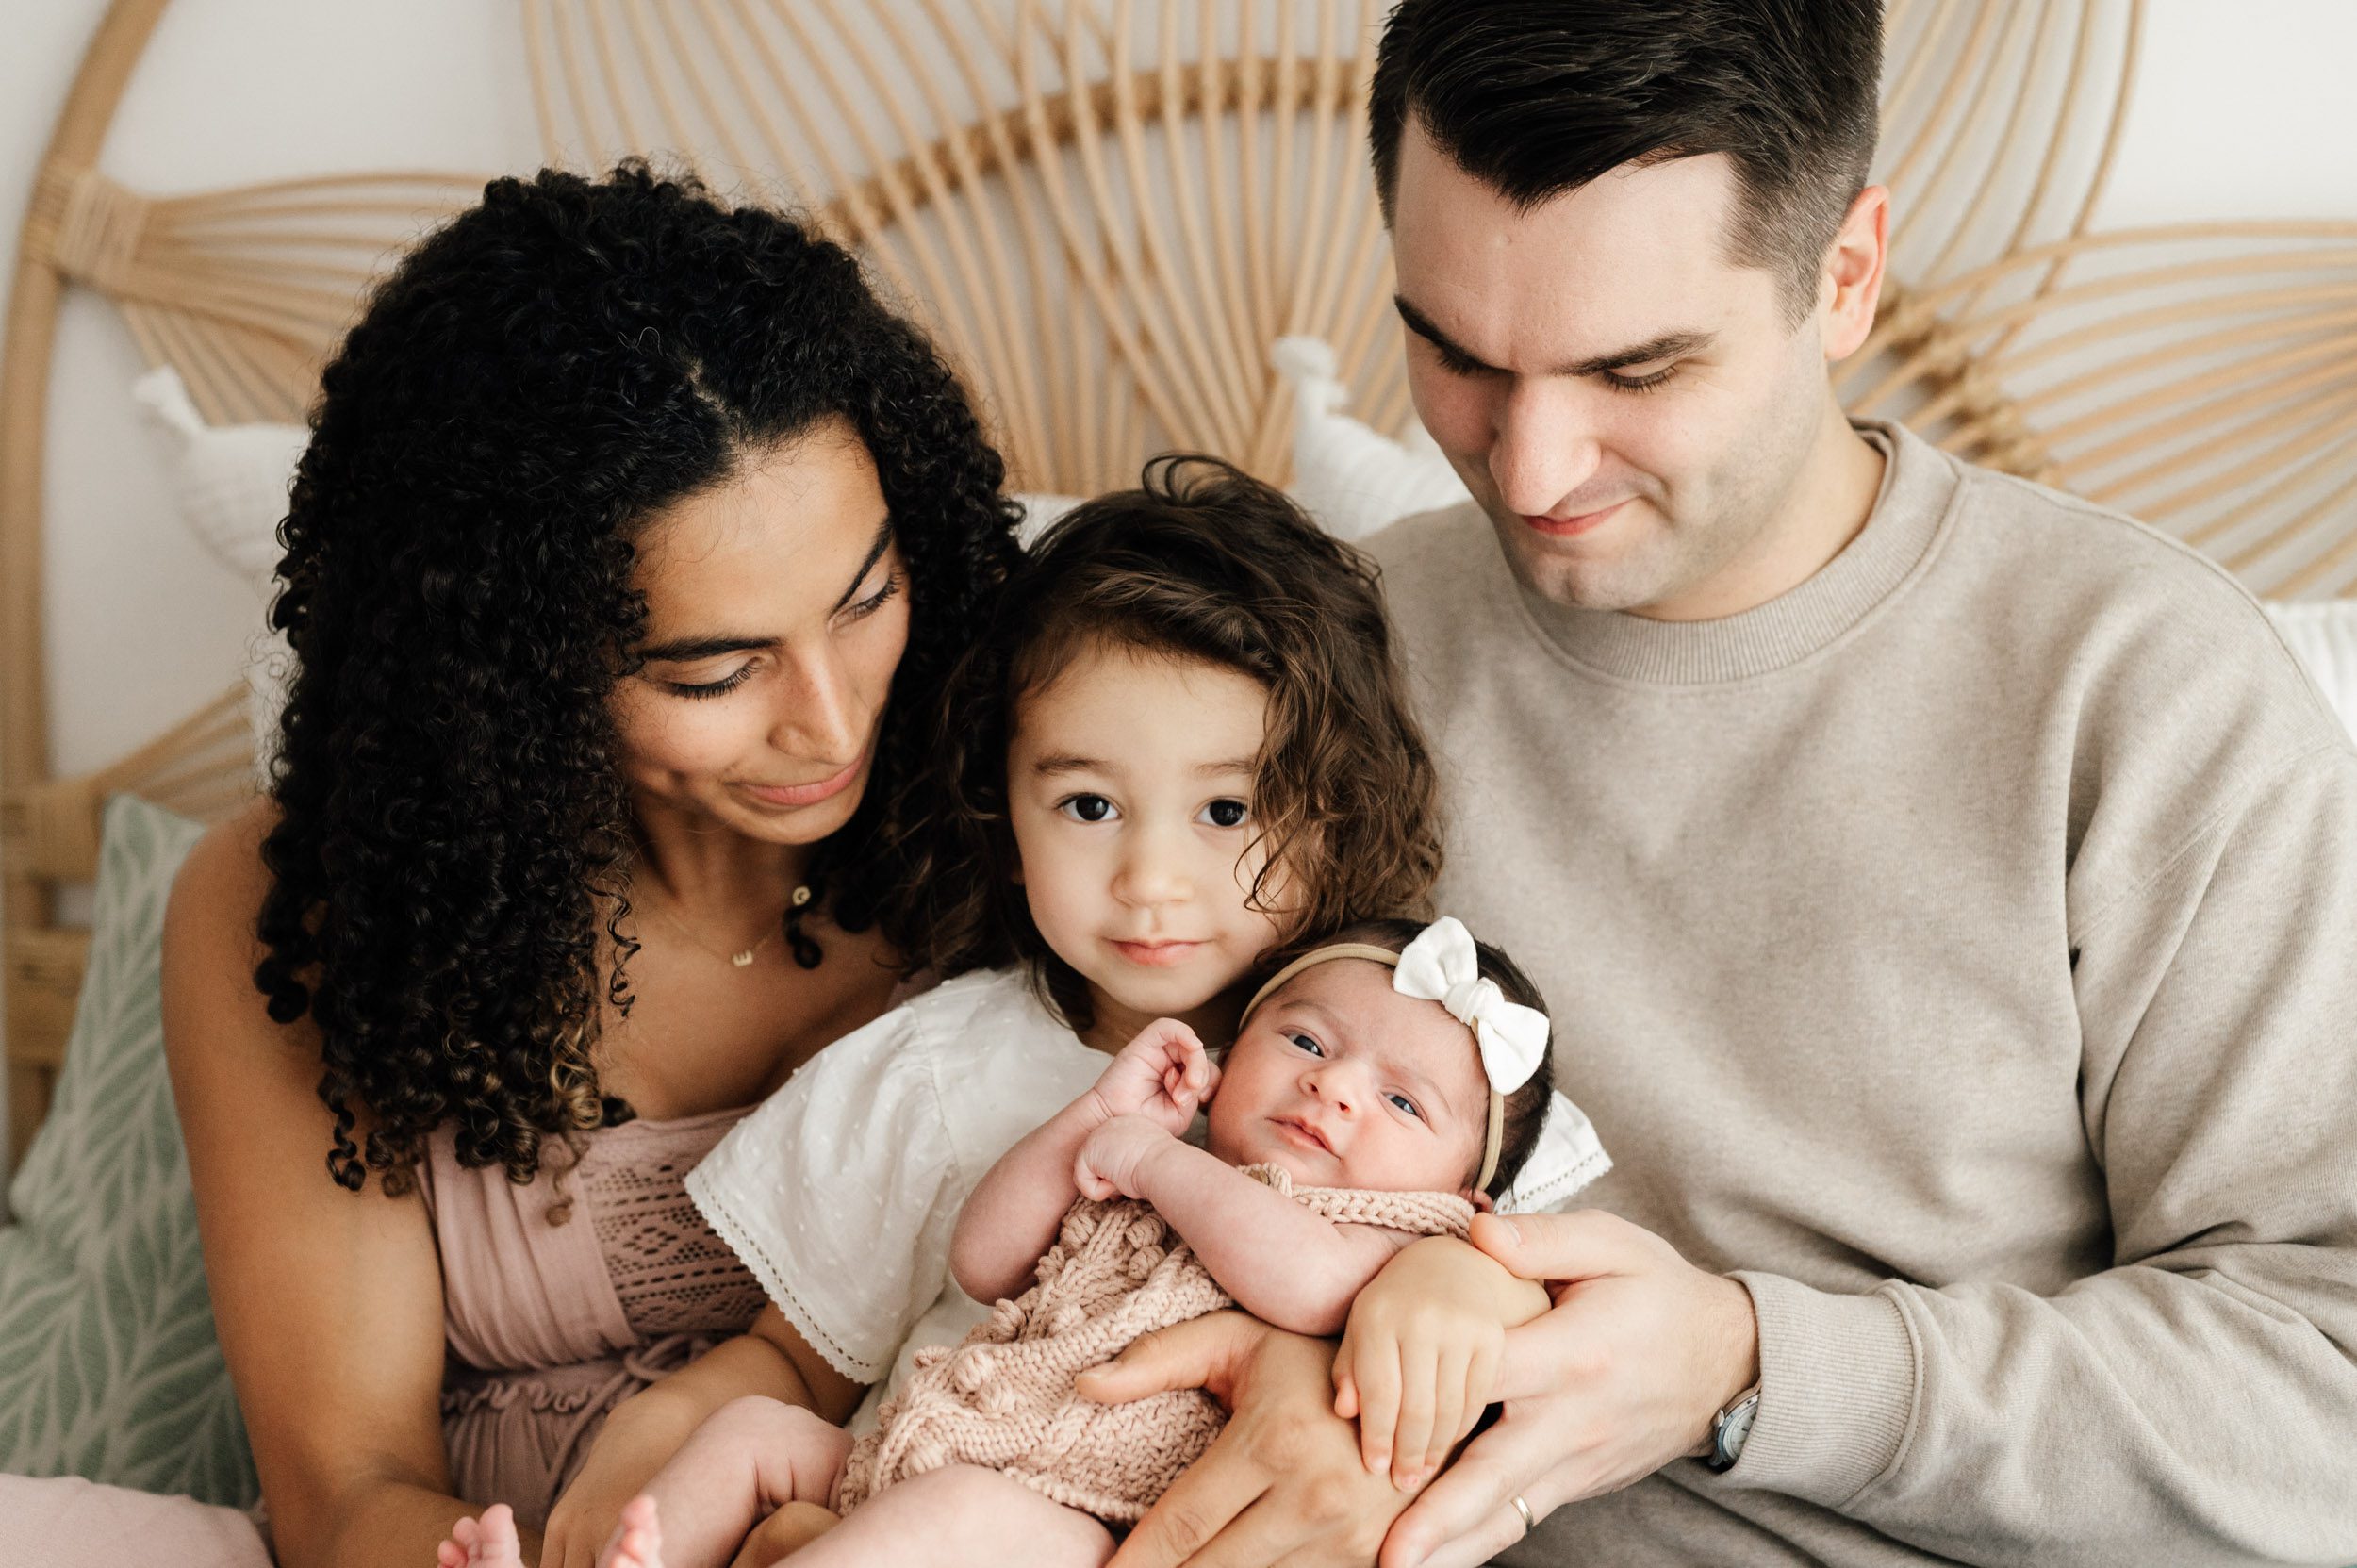 parents sitting on a bed and smiling at their newborn baby girl and older daughter in their lap as big sister and baby girl look directly at the camera during a natural light newborn photo session